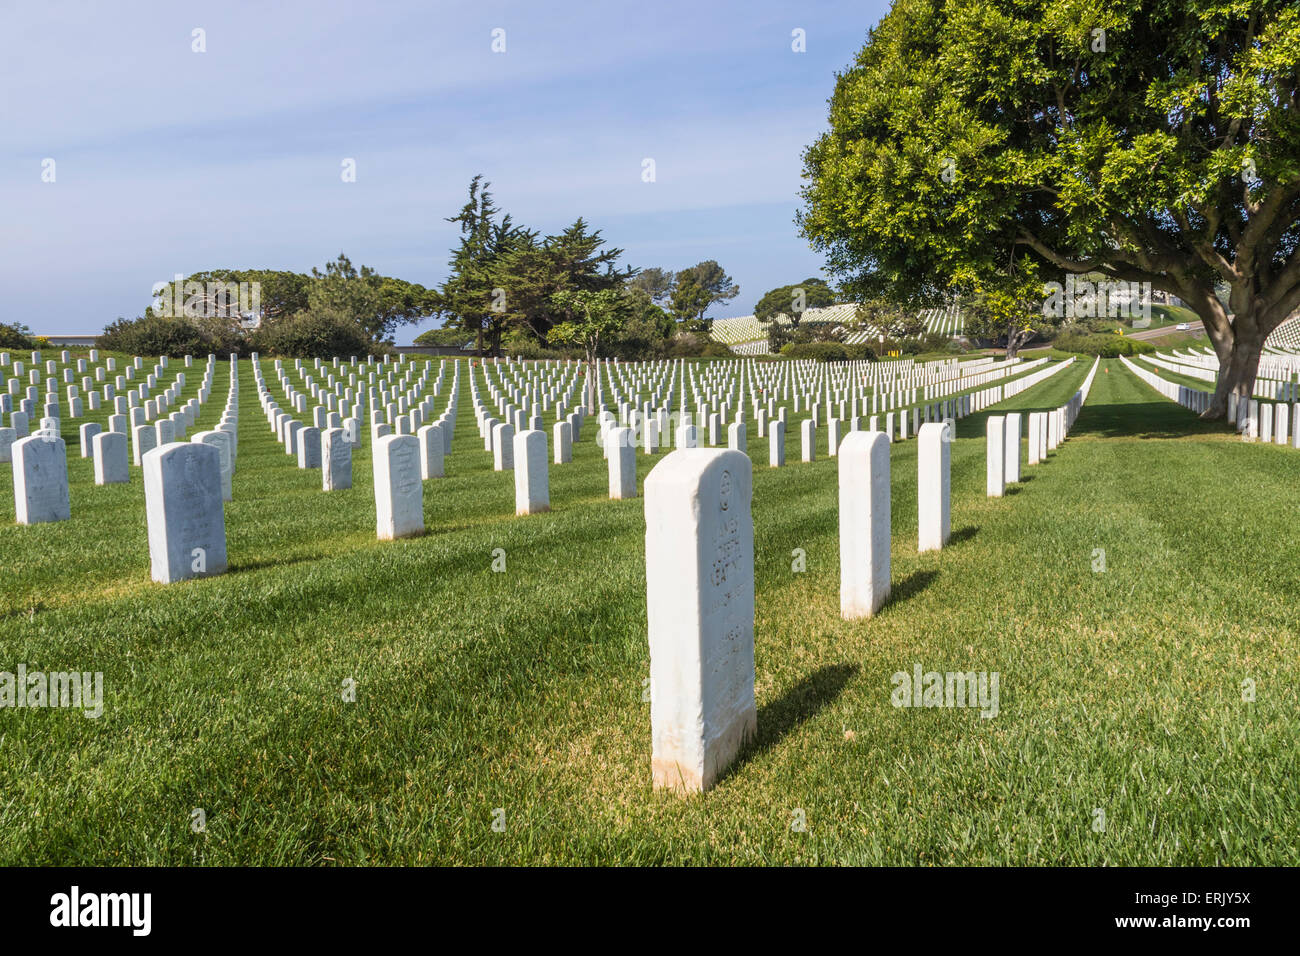 "Fort Rosecrans National Cemetery" on Point Loma Peninsula in San Diego. Stock Photo